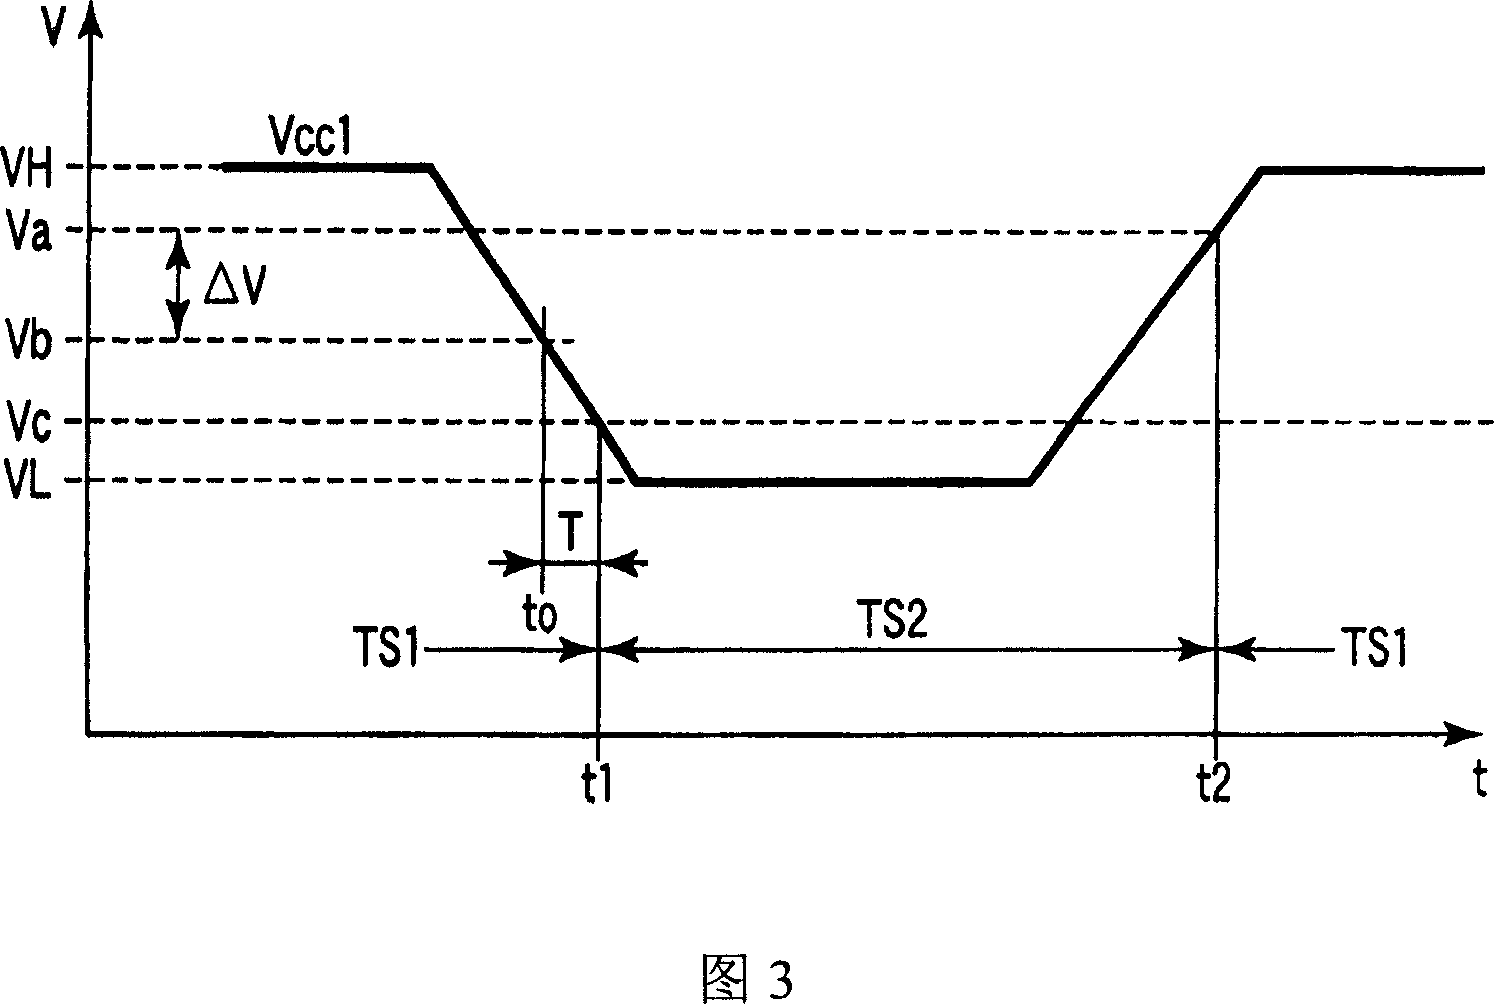 Information processing apparatus having electronic device whose operating speed is controlled, and method of controlling the operating speed of the electronic device